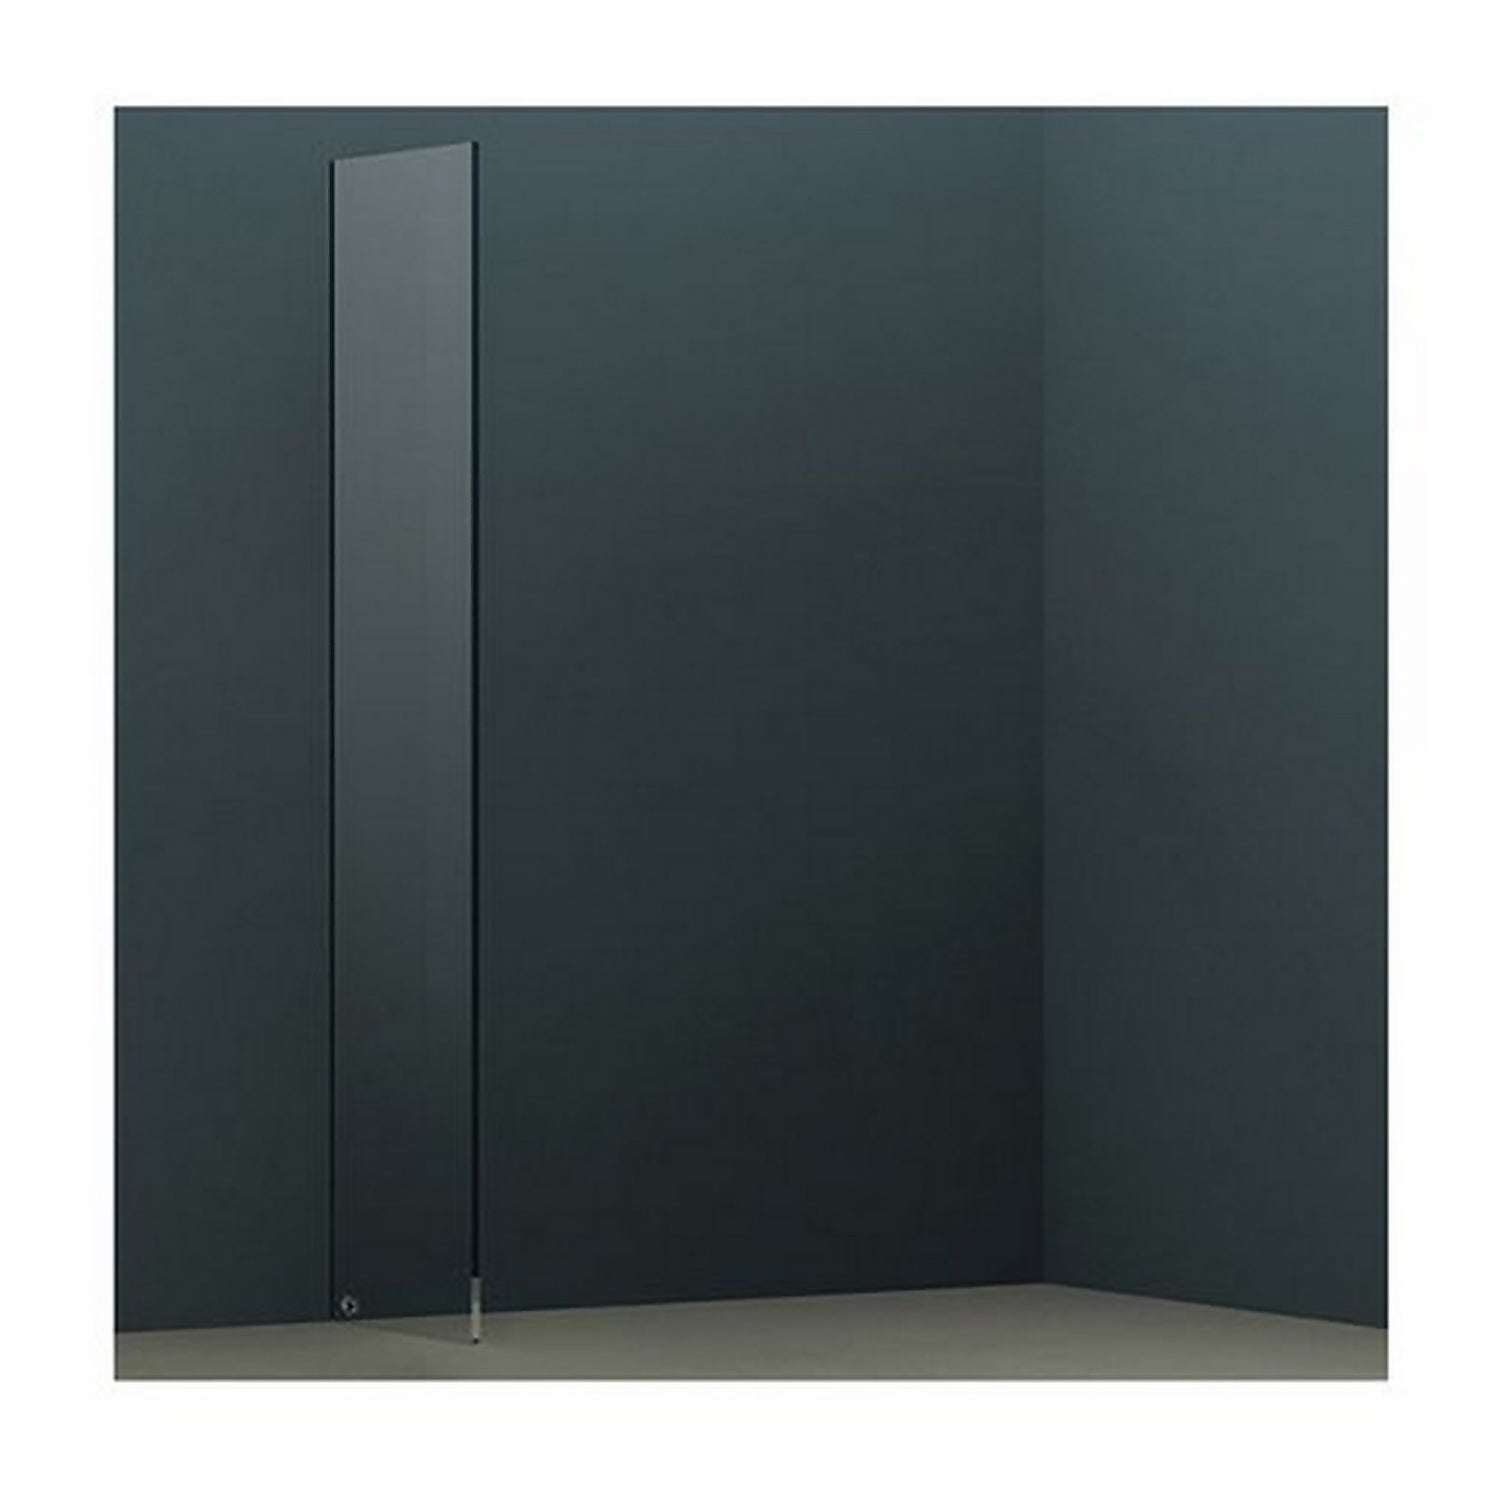 Wet Room Screen with Wall Bar 2000 x 900mm - Black